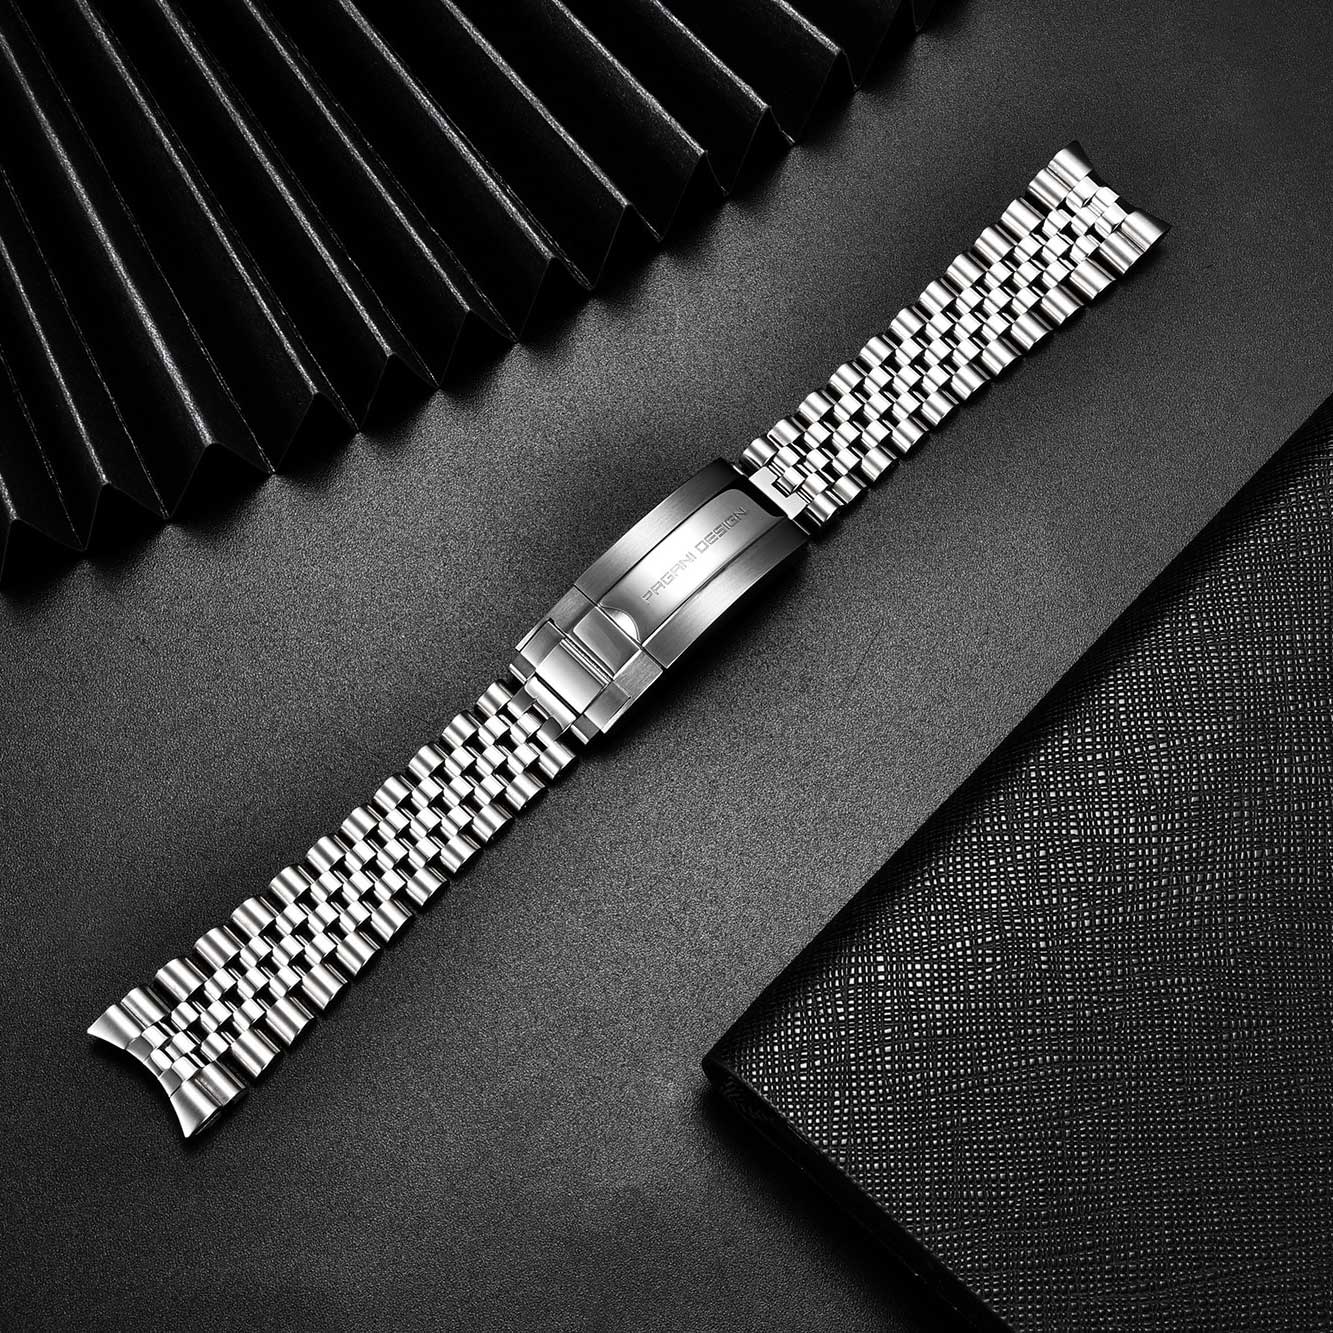 20mm Oyster Stainless Steel Bracelet Watch Strap For Seiko chronograph  solar | eBay